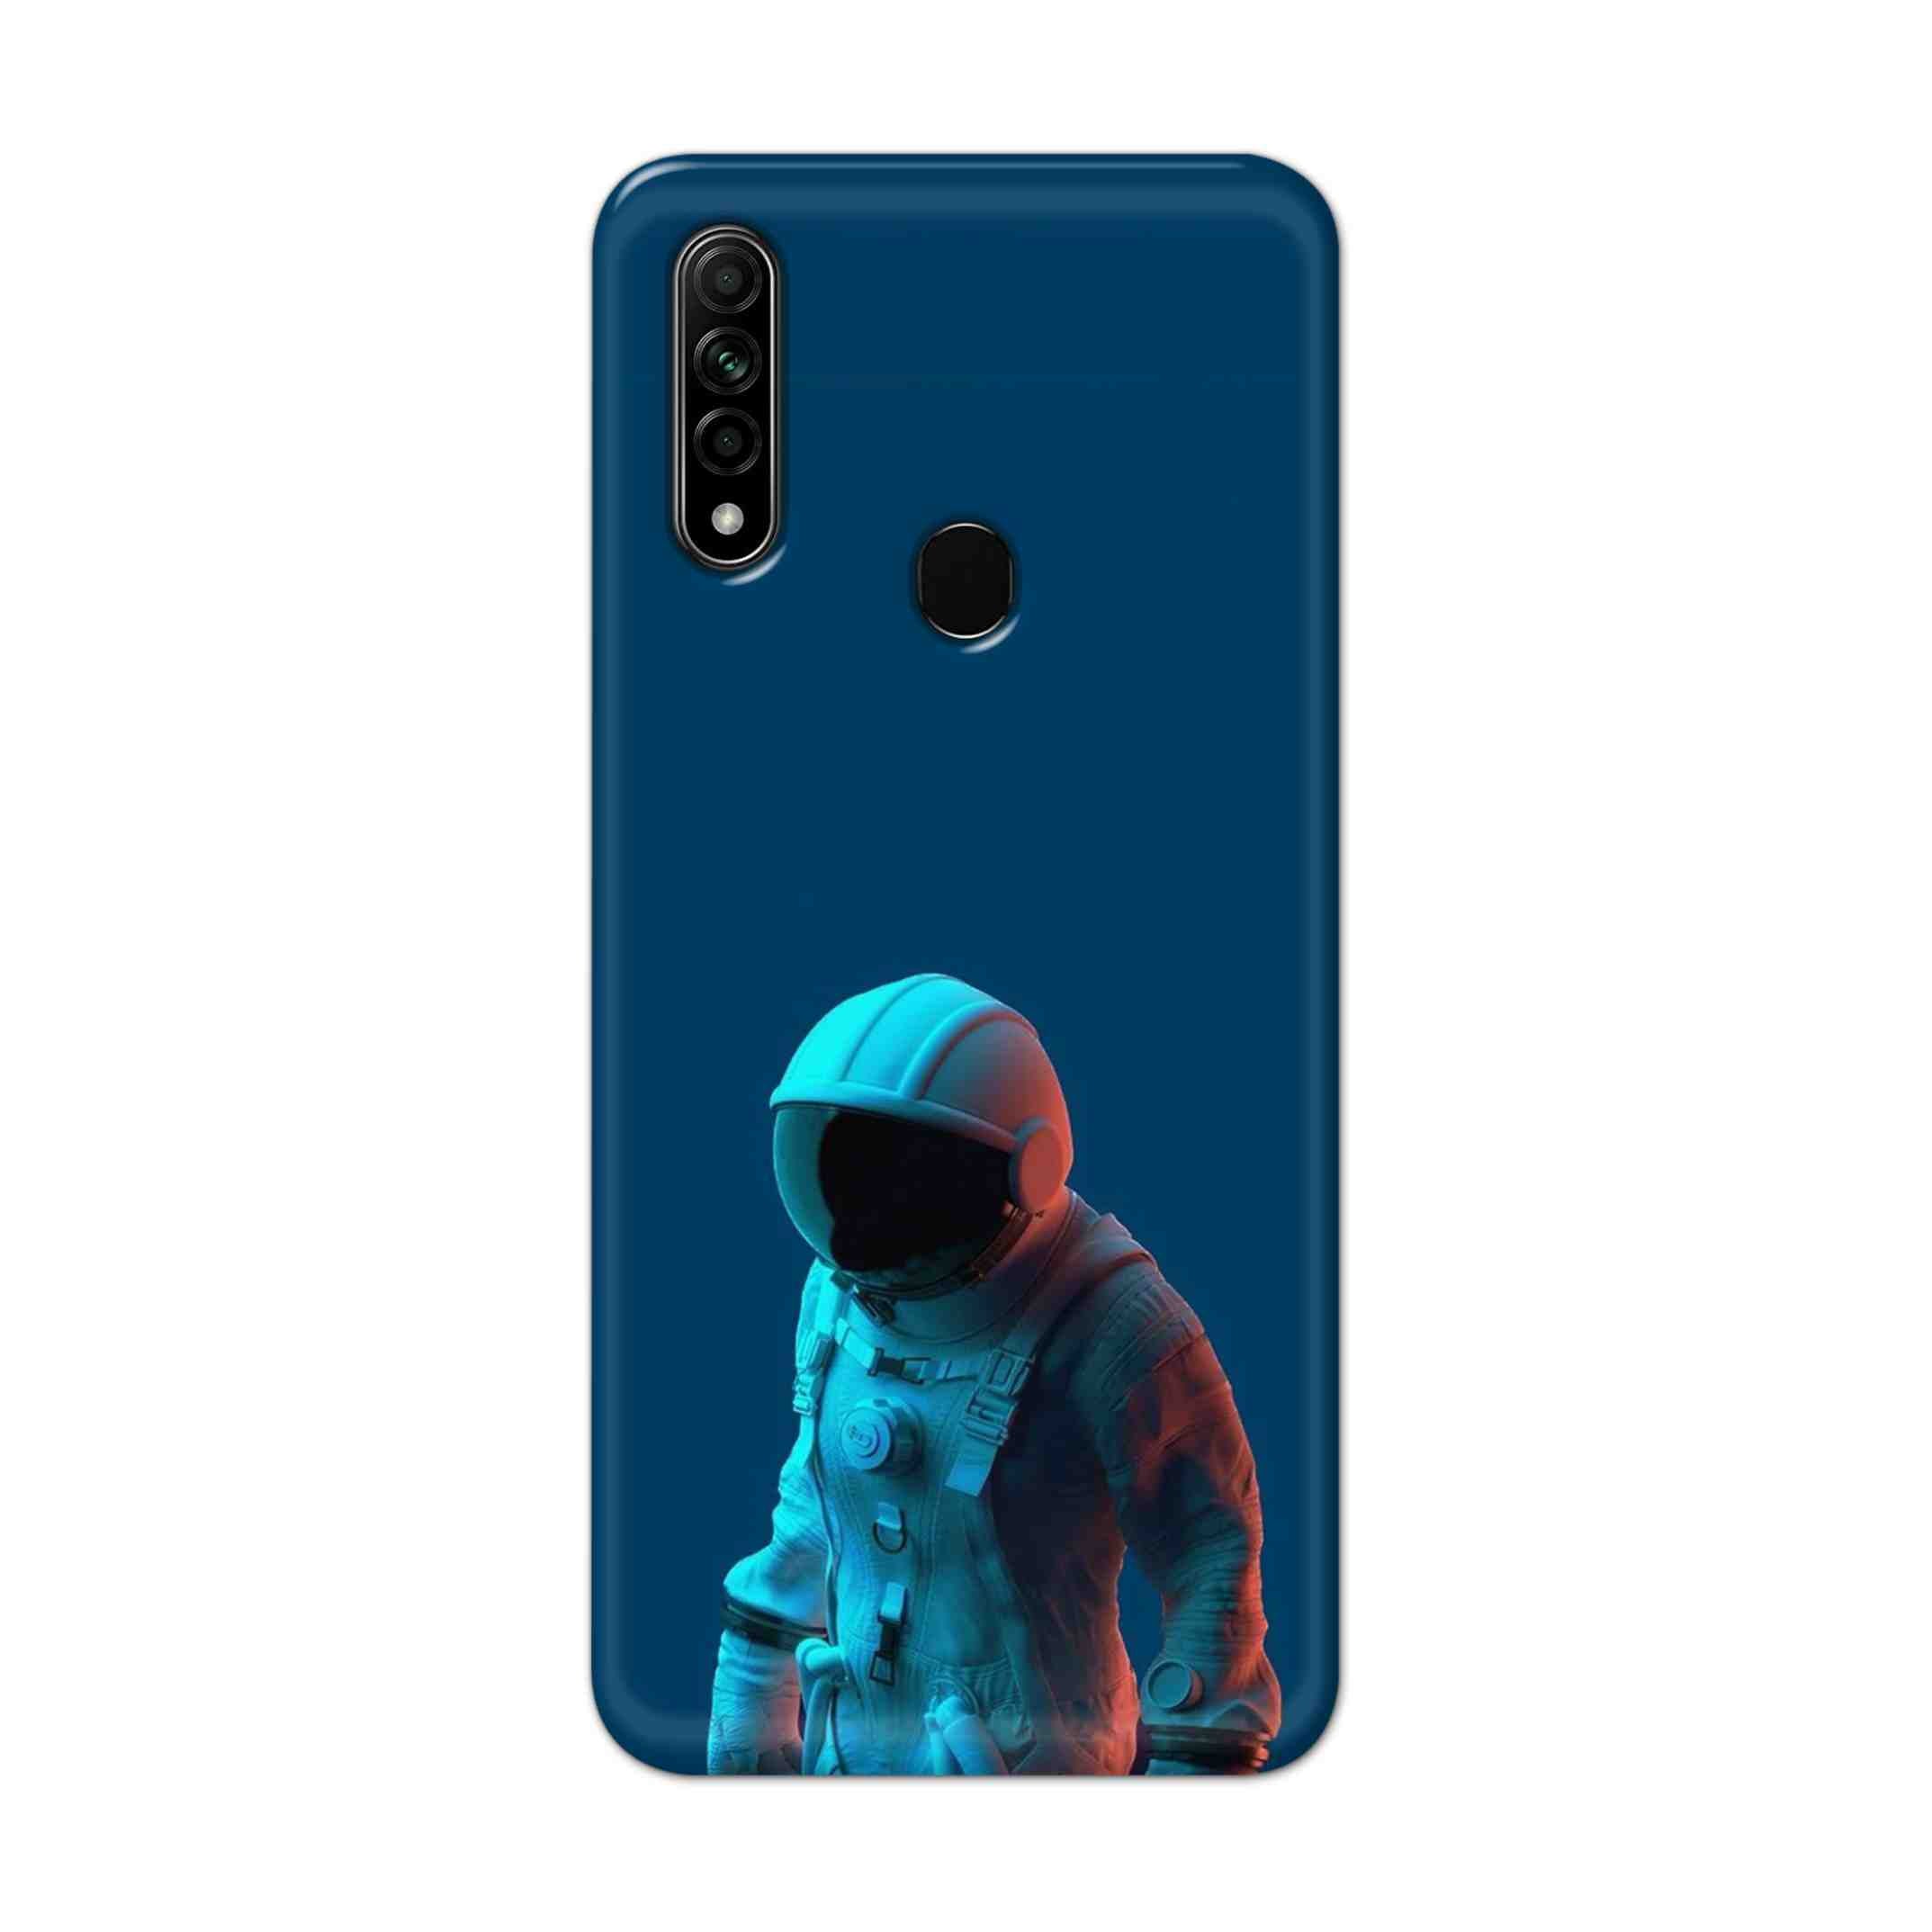 Buy Blue Astronaut Hard Back Mobile Phone Case Cover For Oppo A31 (2020) Online